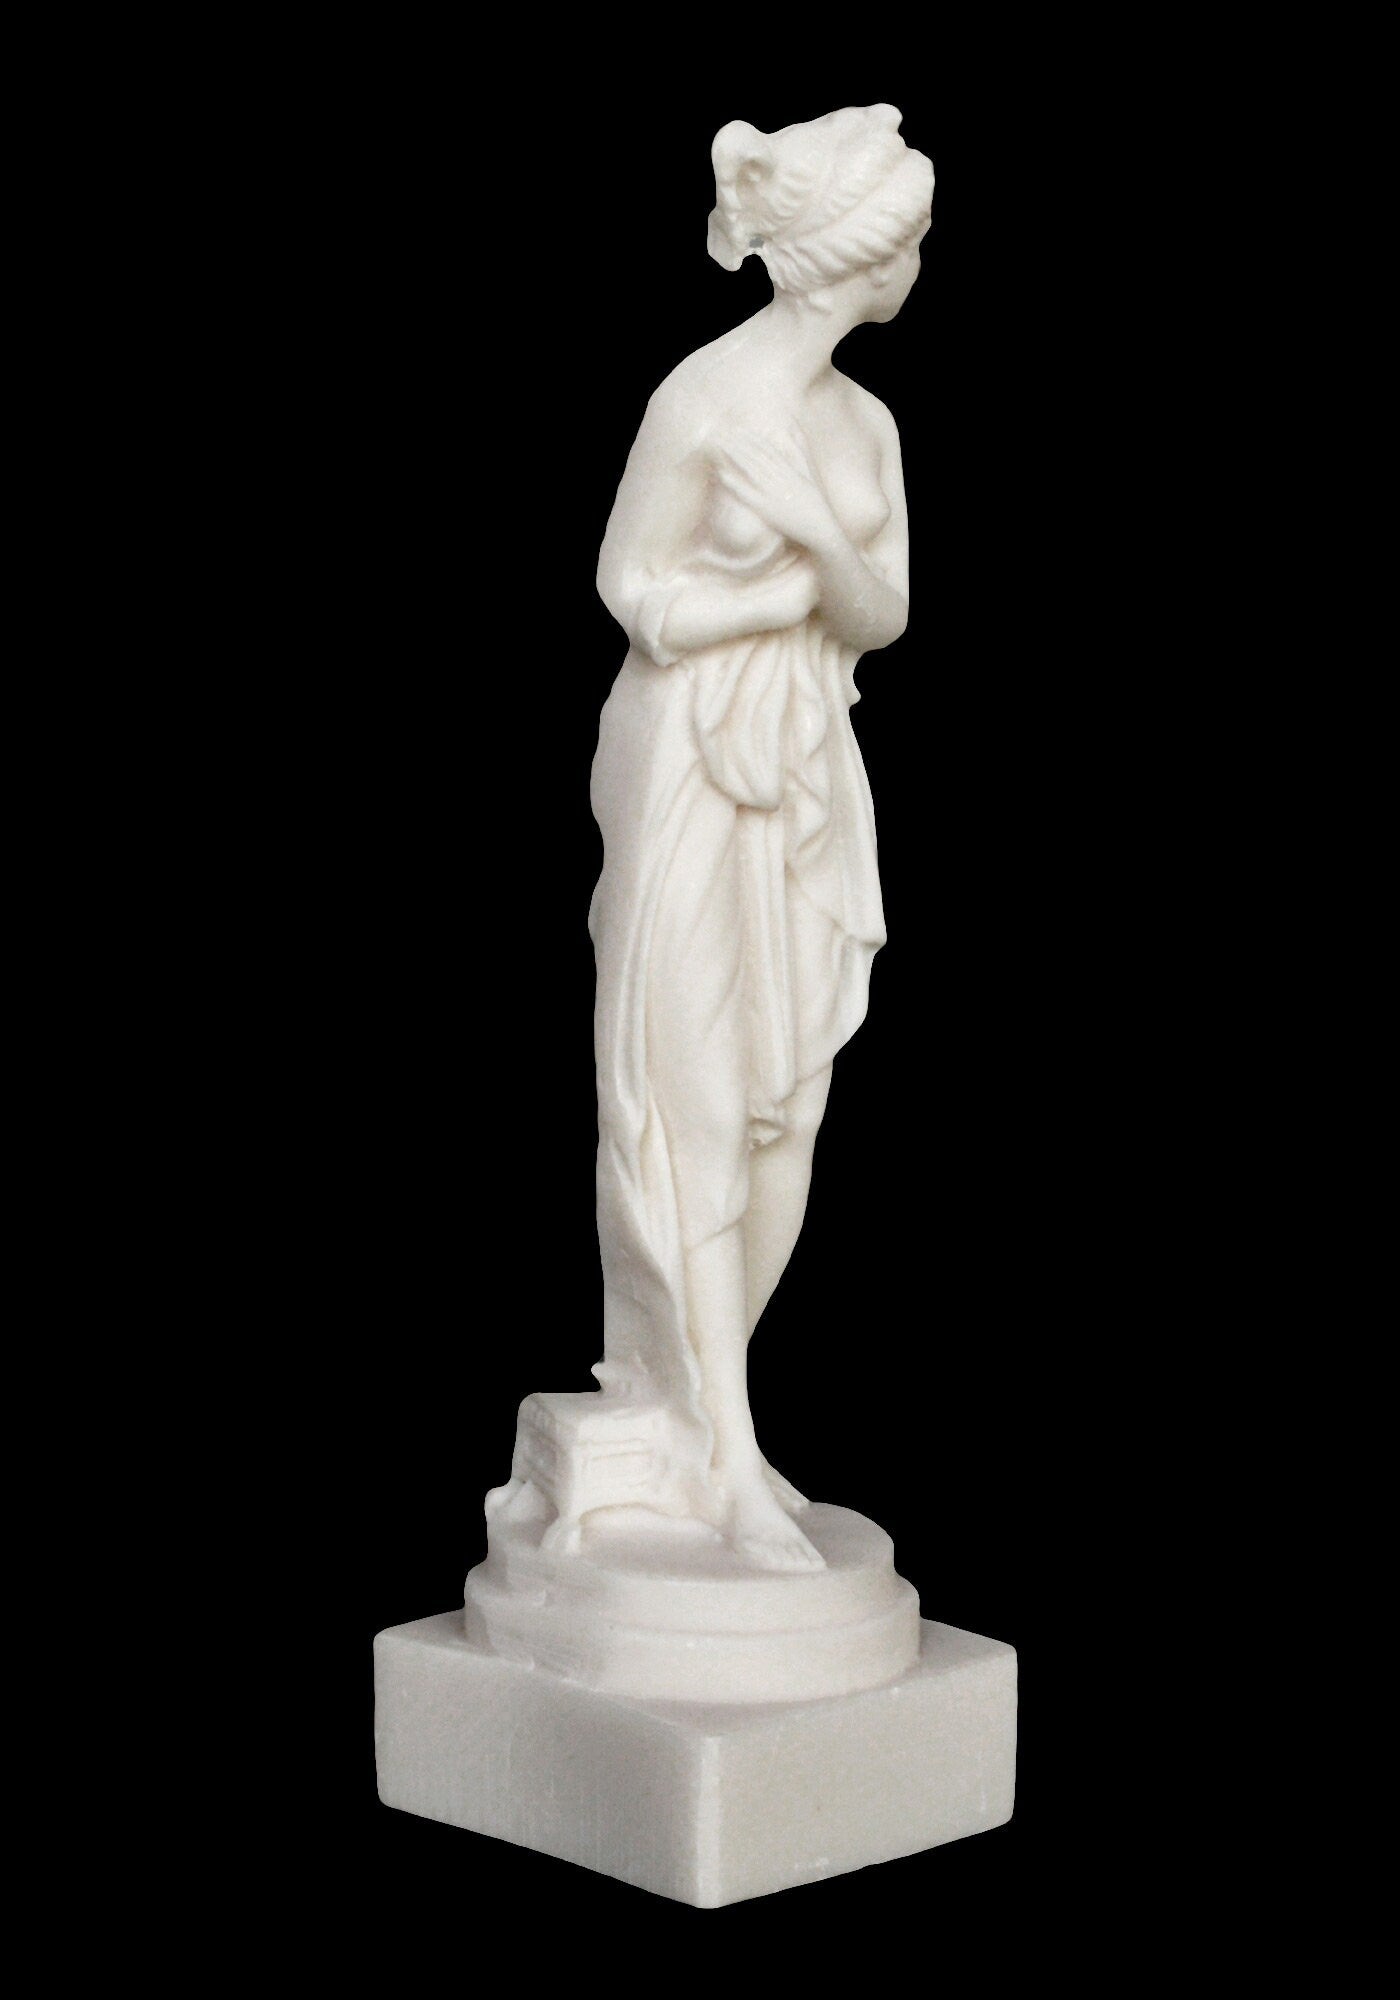 Sappho of Lesbos - 630–570 BC - Ancient Greek Lyric Poet - Tenth Muse - Ode to Aphrodite - Charm of Absolute Naturalness - Alabaster Statue